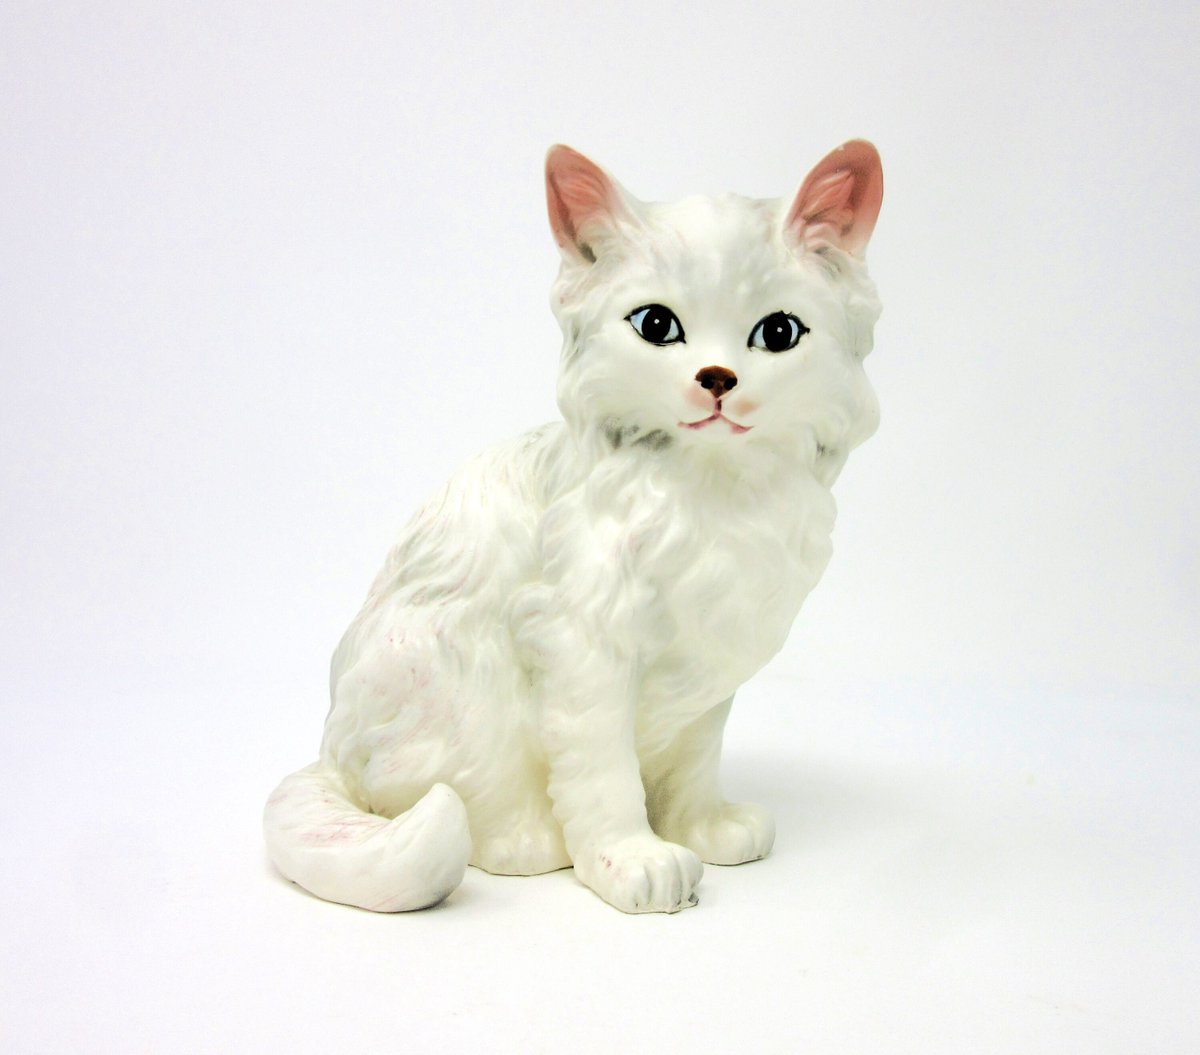 Vintage Porcelain Lefton Cat Figurine, White Persian with Pink Ears and Fluffy Fur, Lifelike House Pet, Cats Kitten Gift Idea, Home Decor tuppu.net/8814743d #vintage #Etsy #etsyseller #PorcelainFigurine